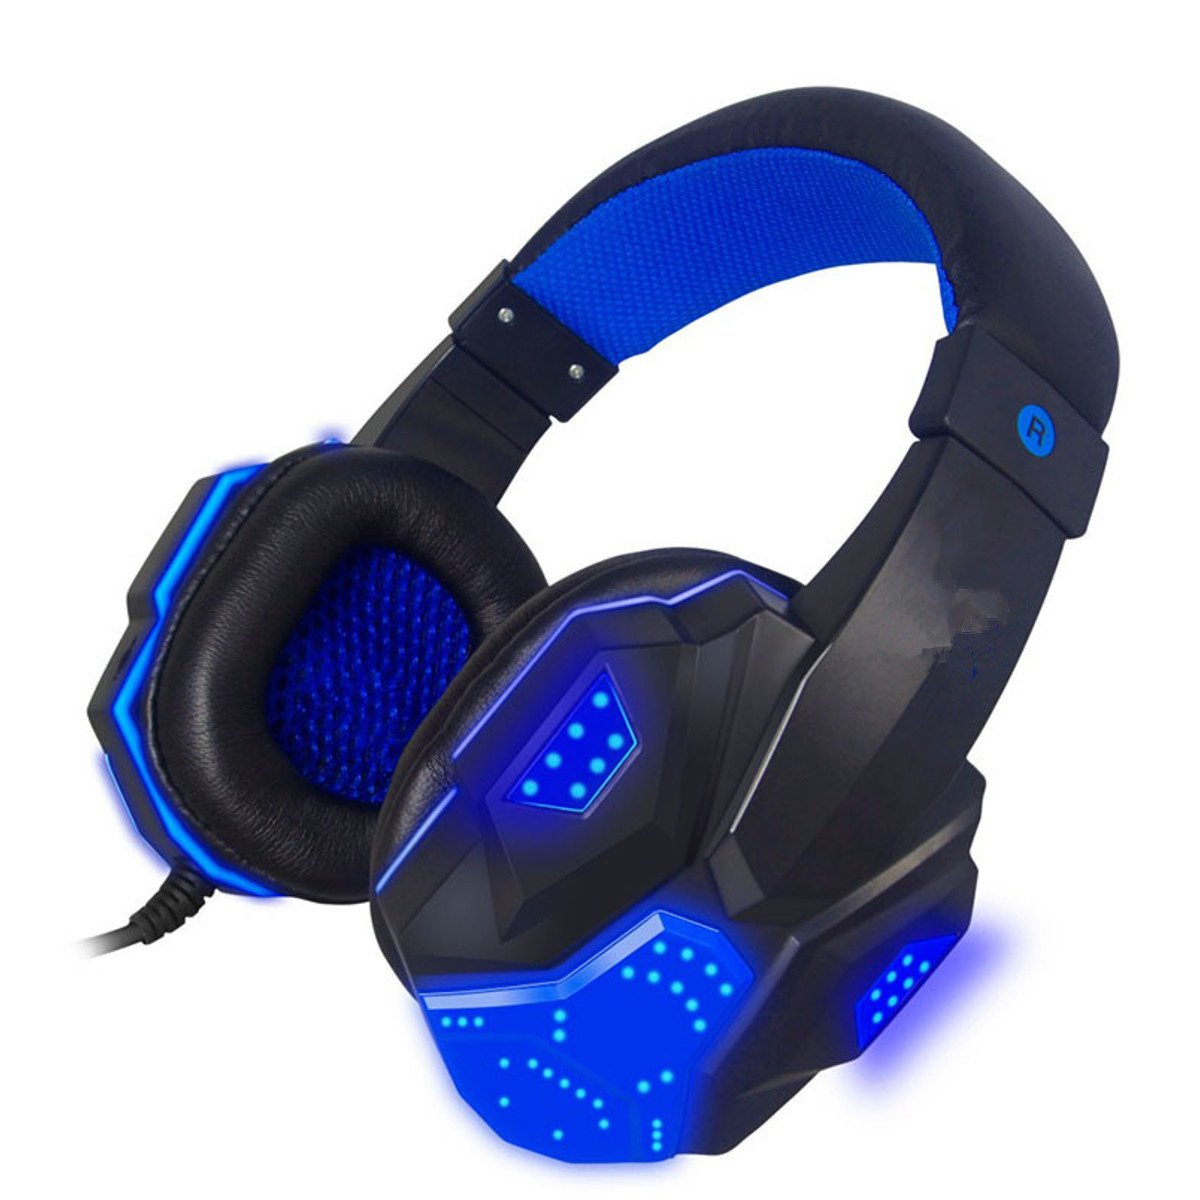 3.5mm USB Wired Gaming Headband Headphone with LED Light Surround Stereo Headset for XBOX PS4 Game Console Computer 1